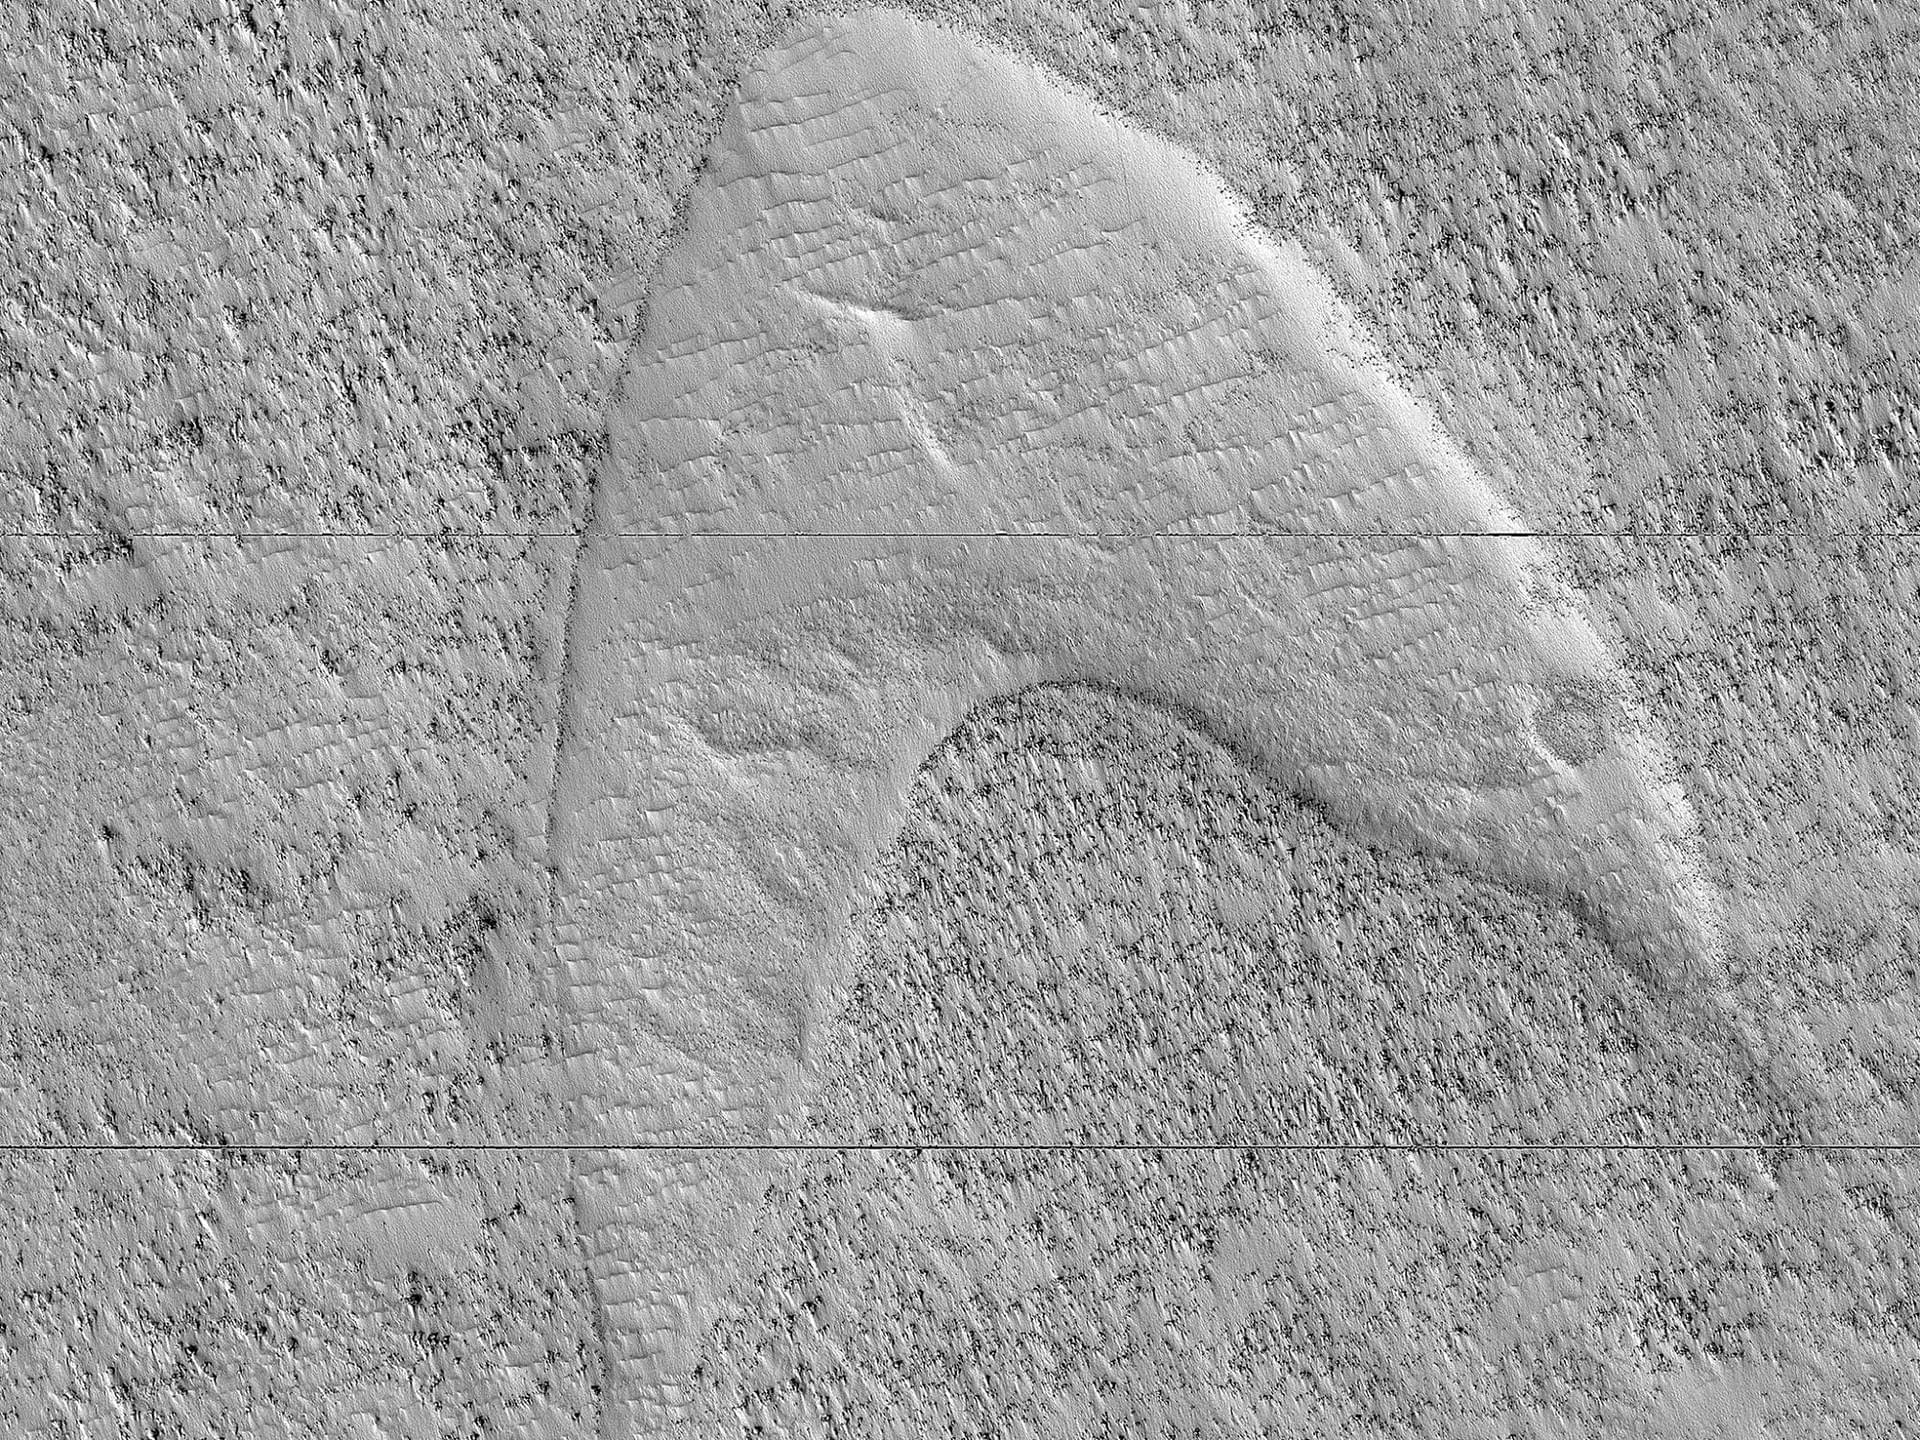 NASA Finds "Star Trek" Image On Mars, Your Move Lucasfilm